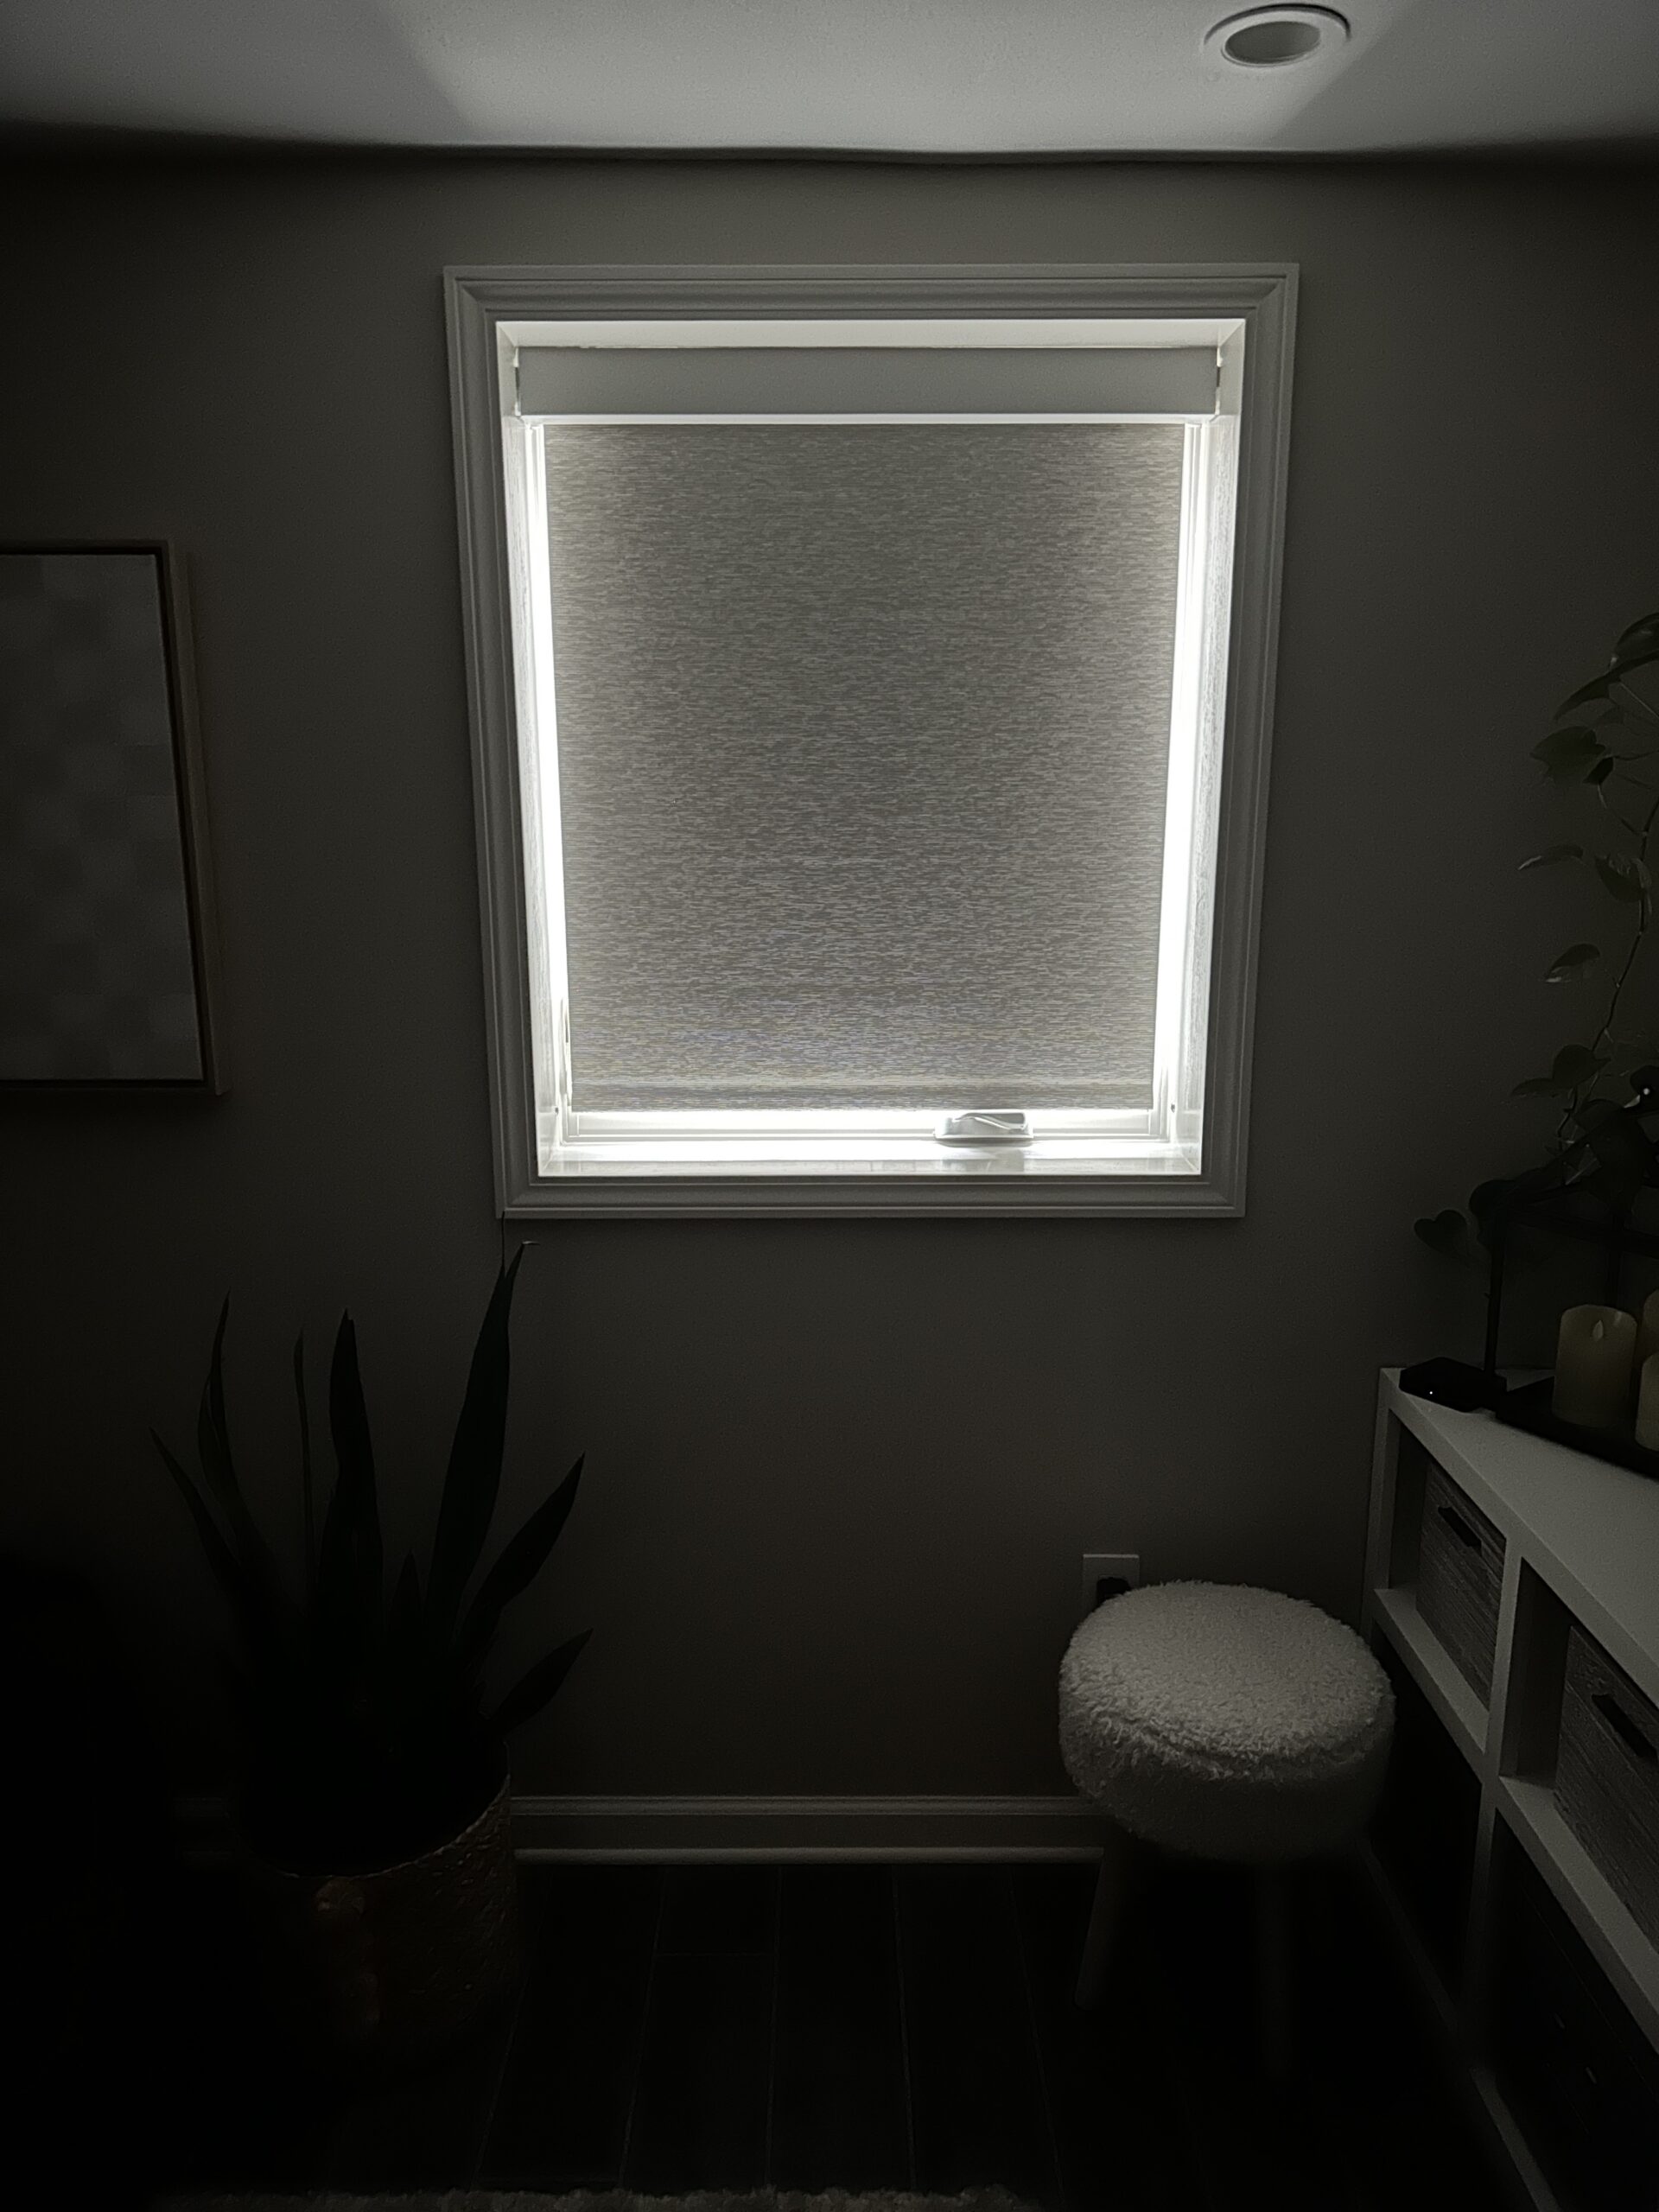 Here is a window with the shade down all the way.